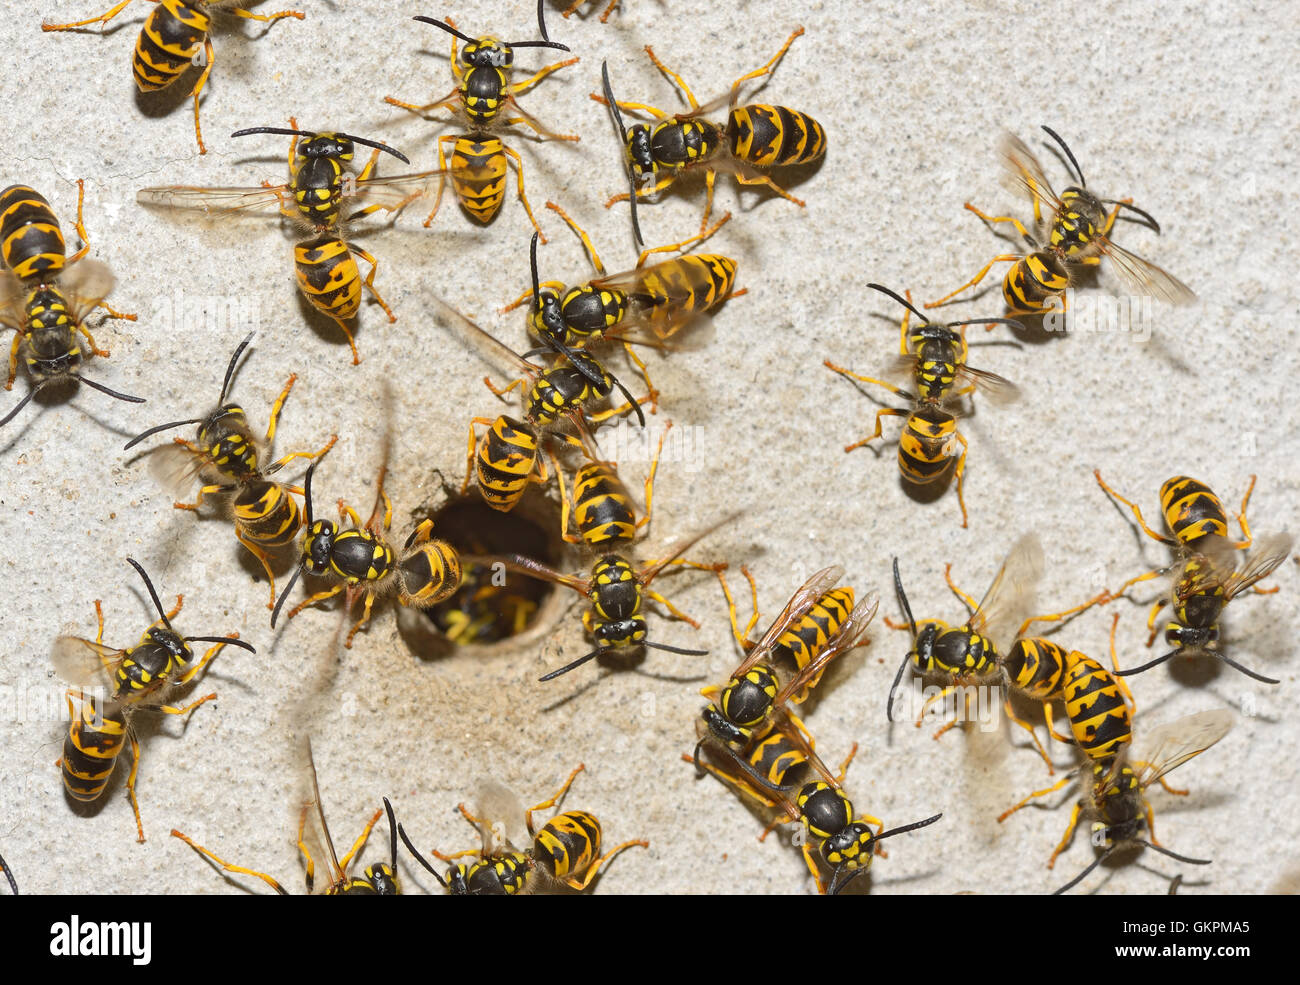 Nest of a family of wasps which is taken a close-up Stock Photo